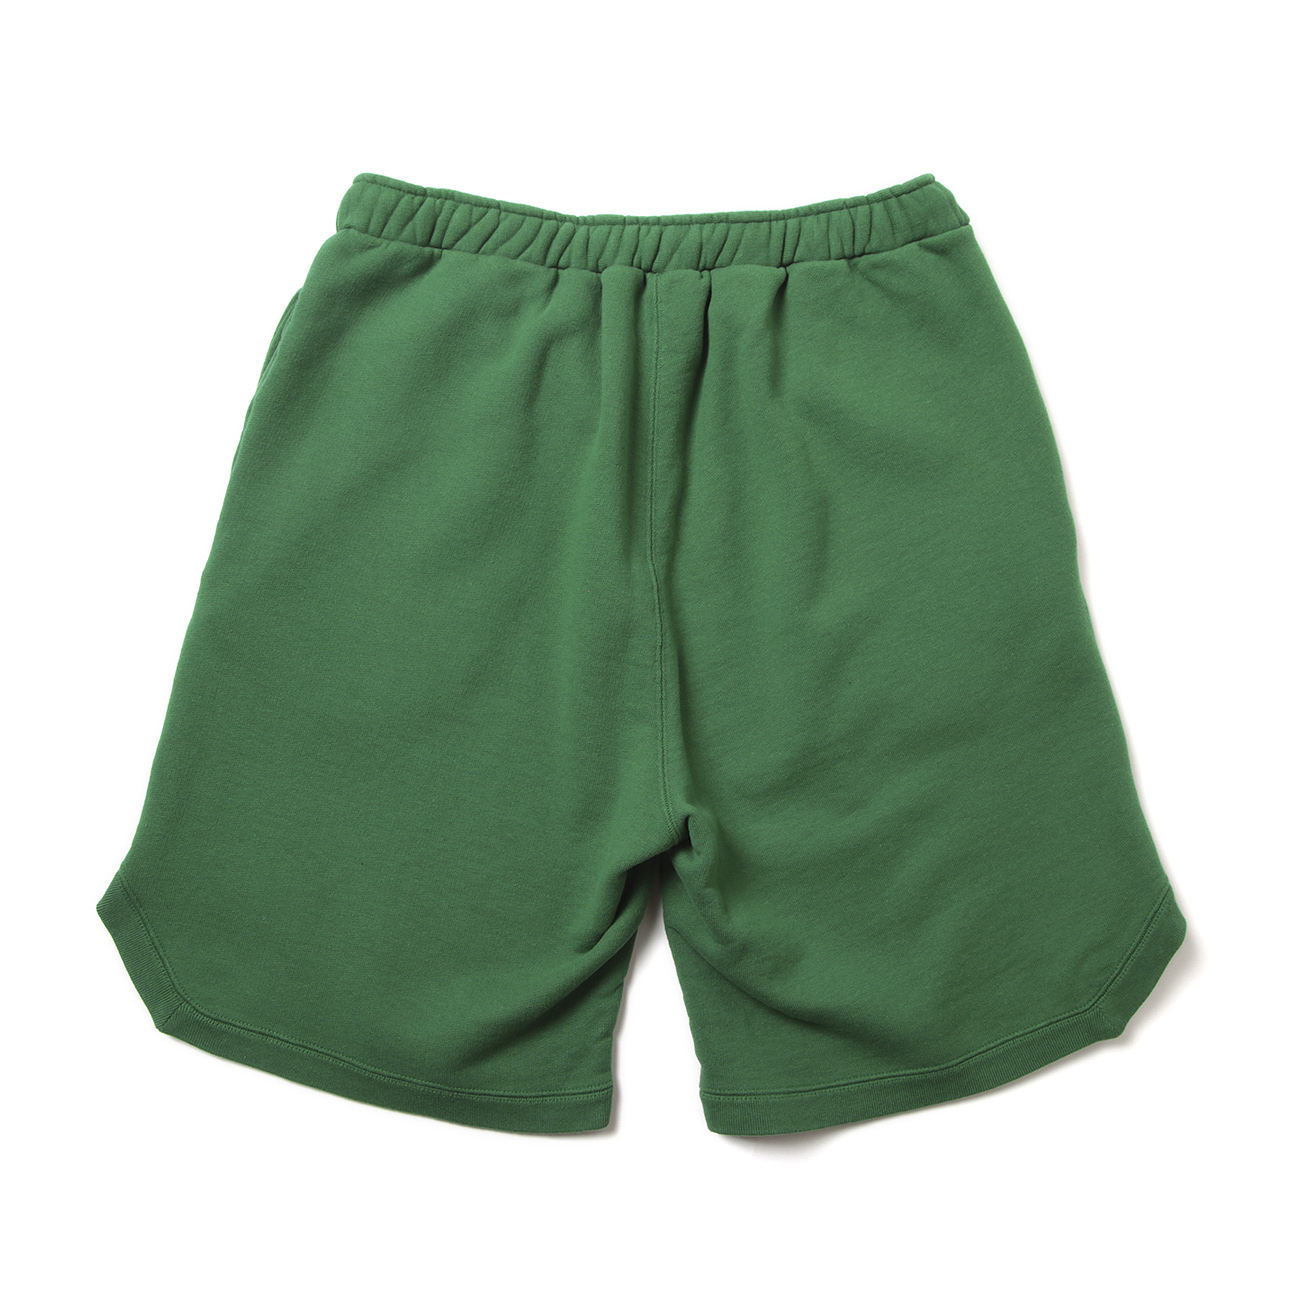 S.F.C Stripes For Creative / エスエフシー | BASKETBALL SHORTS - Green | 通販 -  正規取扱店 | COLLECT STORE / コレクトストア